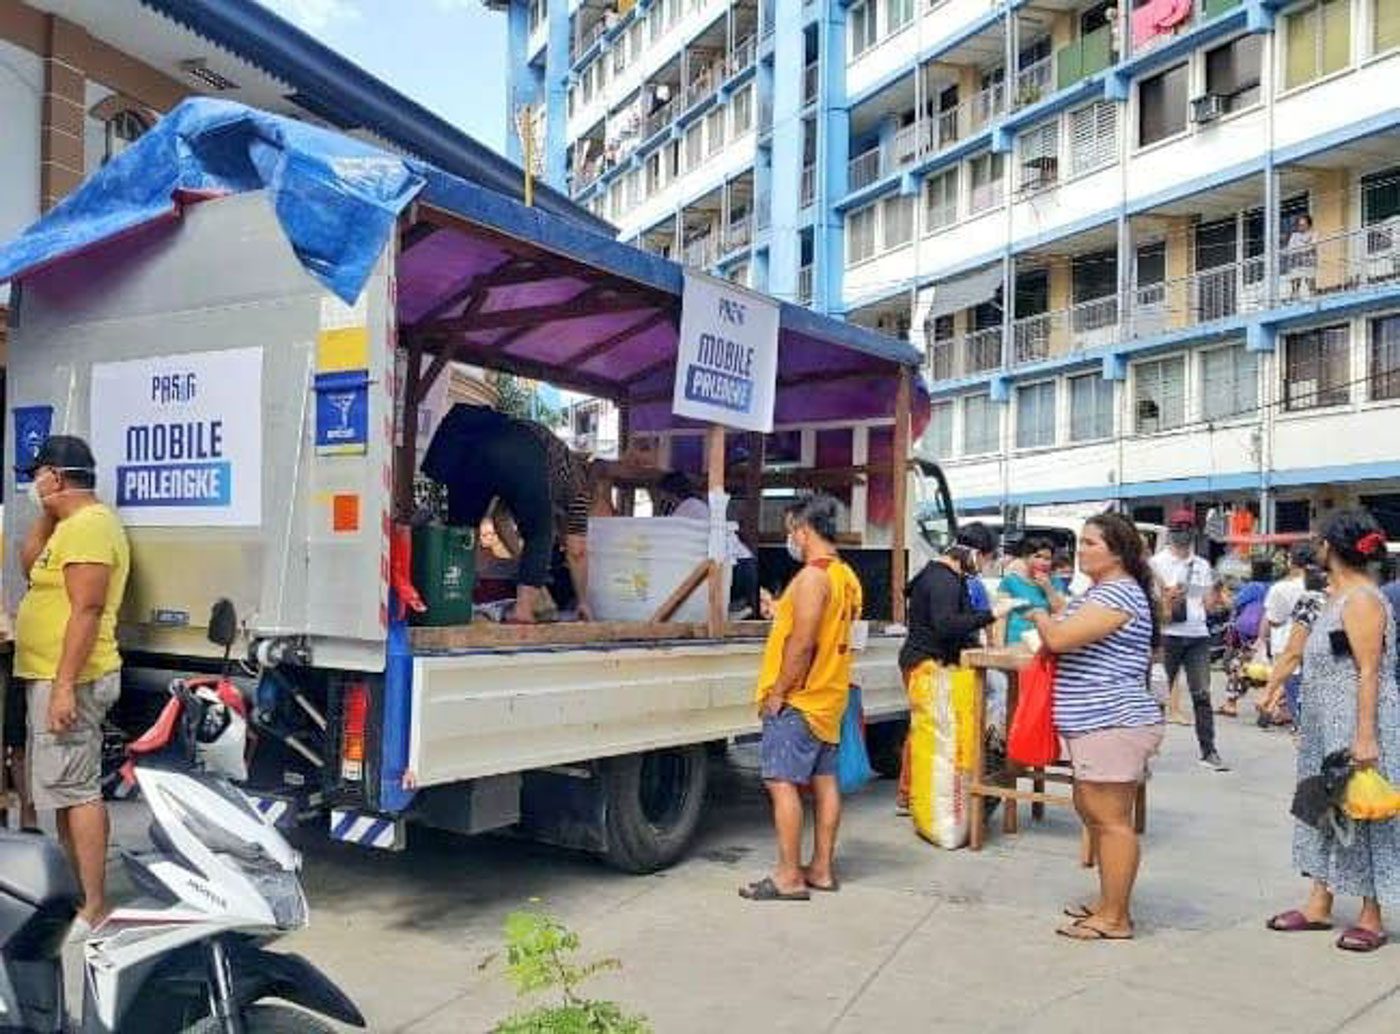 ROVING STORES. The Pasig City government launches a "Mobile Palengke" effort to cut the need for people to leave their homes during the coronavirus lockdown. Photo from Pasig Mayor Vico Sotto's Twitter page 